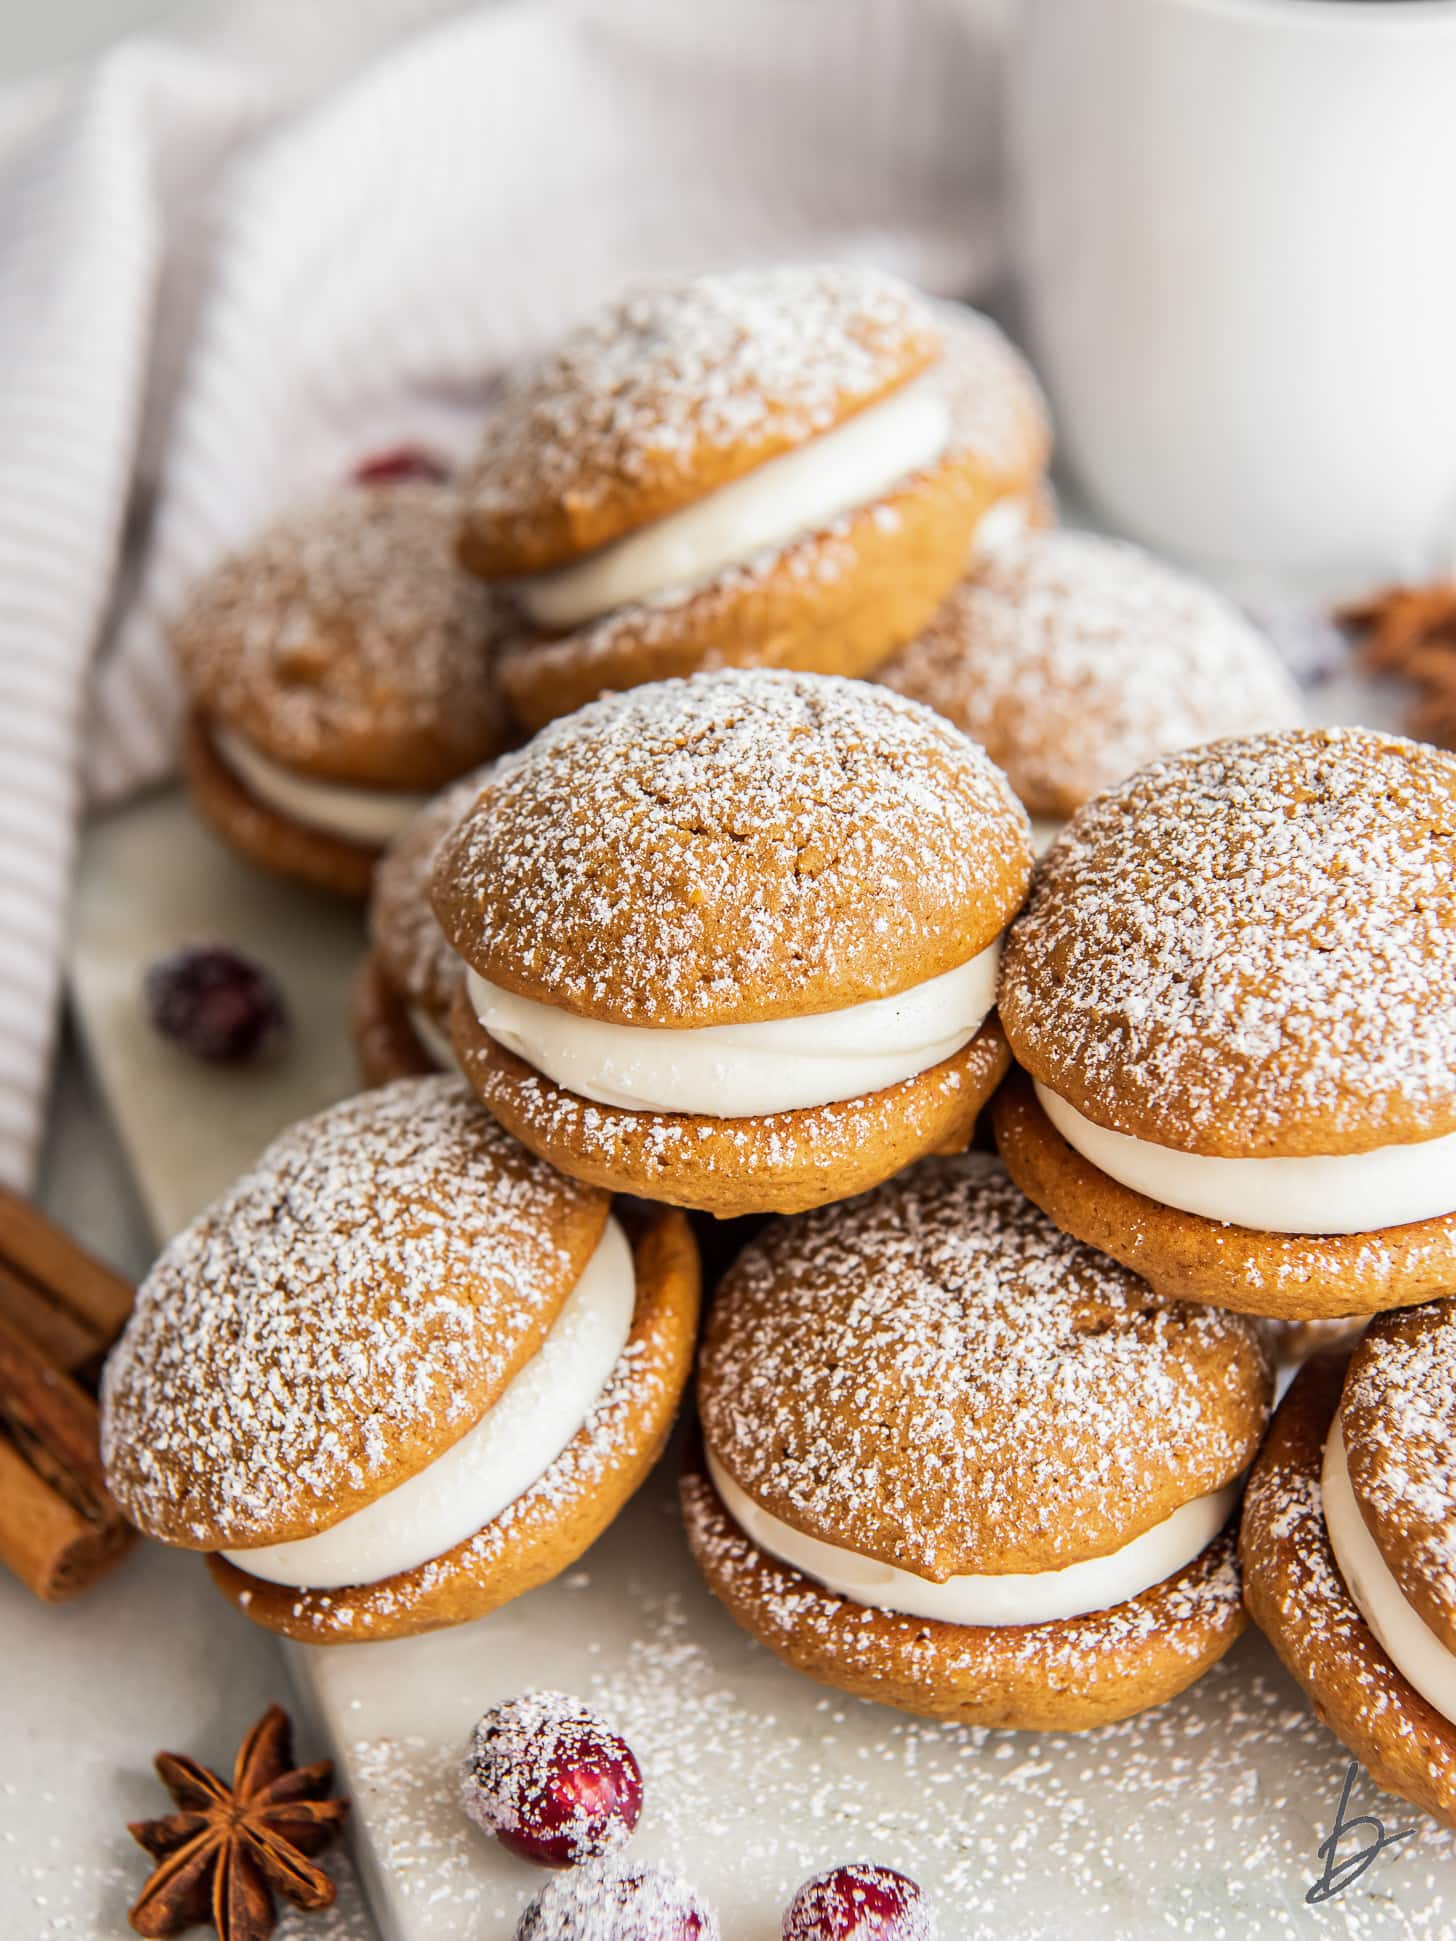 gingerbread whoopie pies in a pile and dusted with confectioners' sugar.